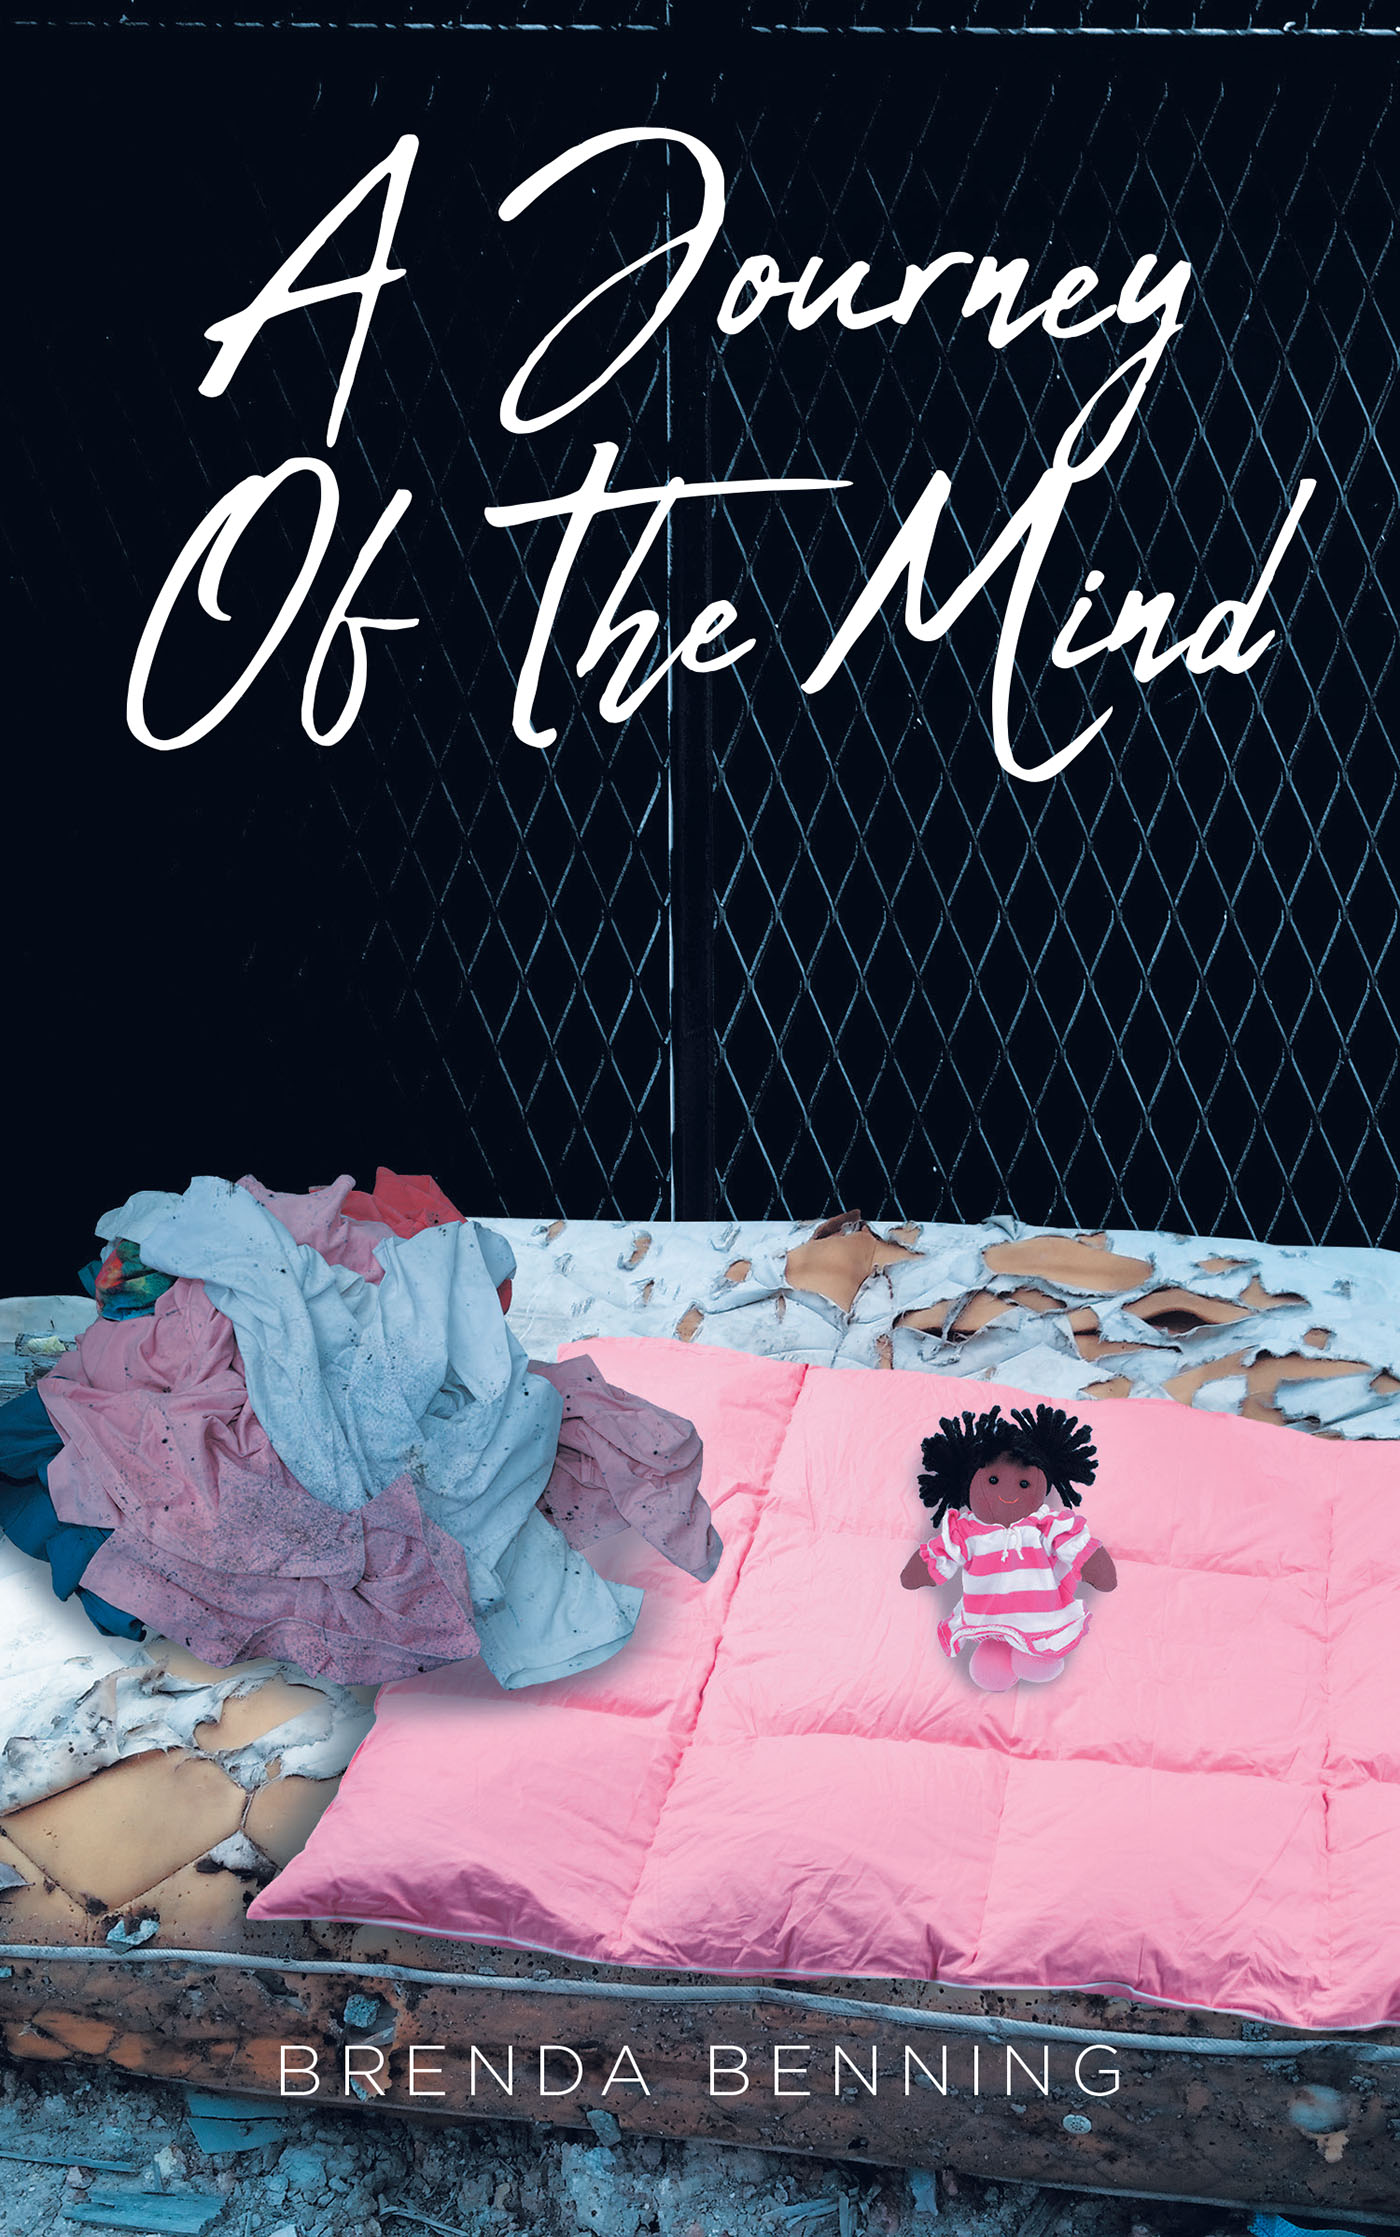 Brenda Benning’s New Book, "A Journey of the Mind," Follows an Aspiring Writer Whose Creative and Imaginative Mind Proves Useful to the FBI on a Kidnapping Investigation